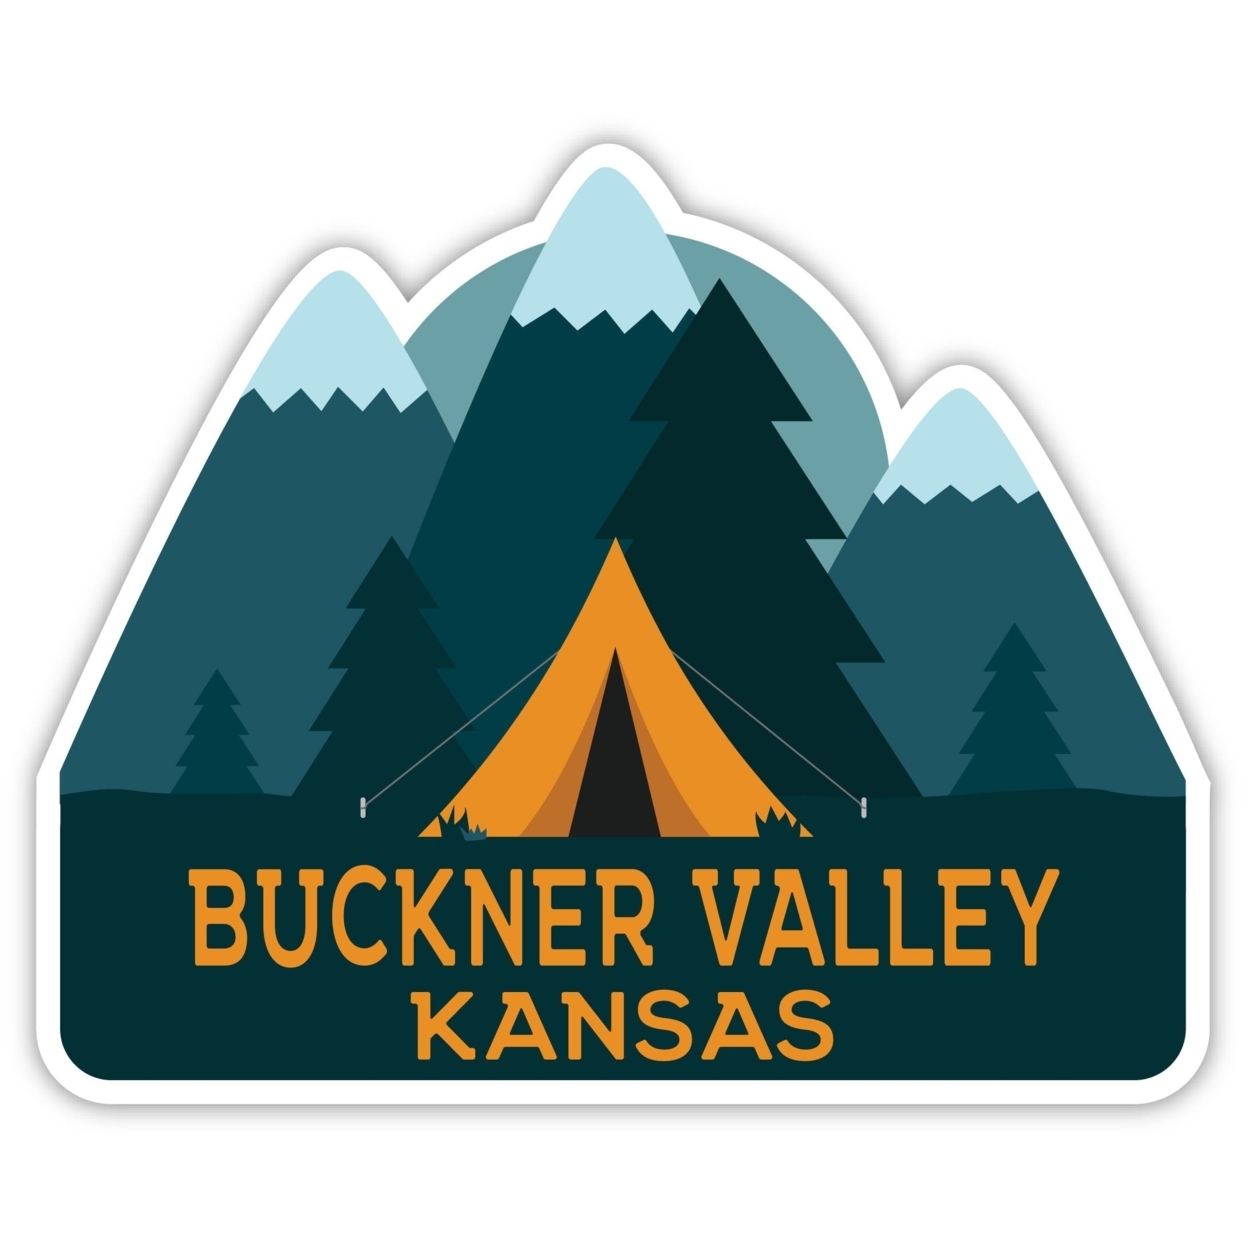 Buckner Valley Kansas Souvenir Decorative Stickers (Choose Theme And Size) - 4-Pack, 10-Inch, Tent